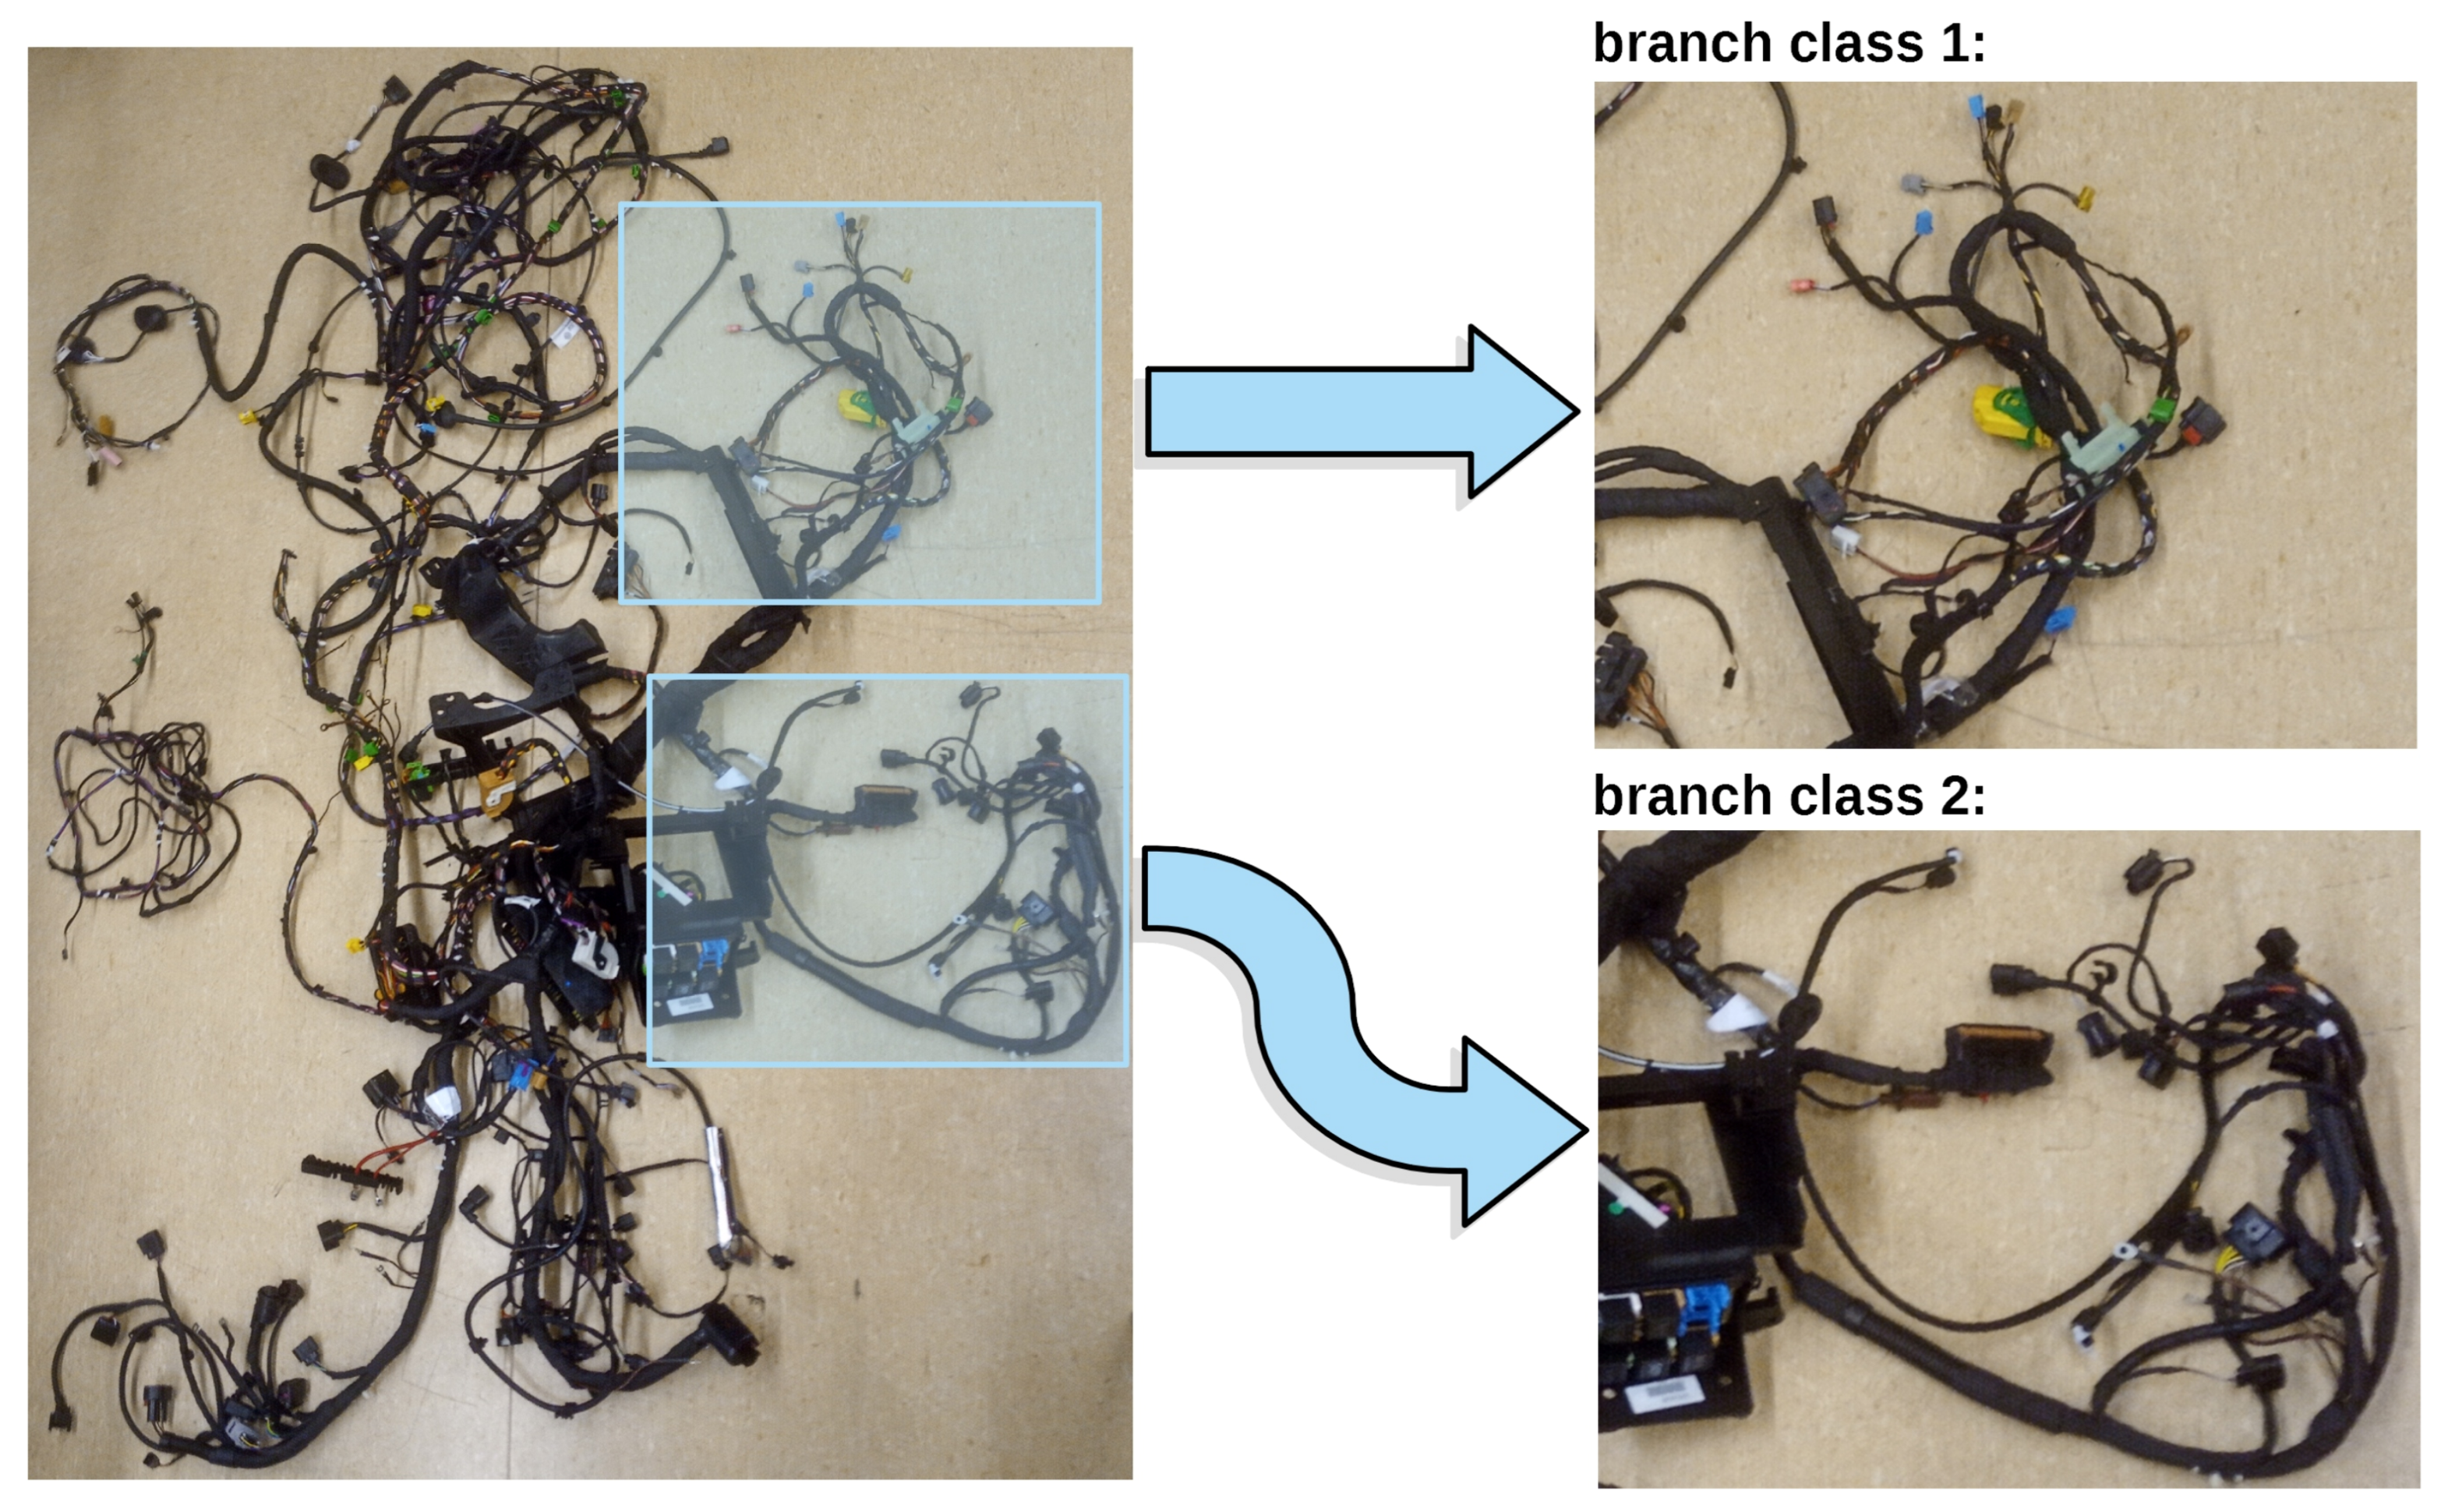 Monitoring Activity During Wire Harness Assembly, 2020-01-14